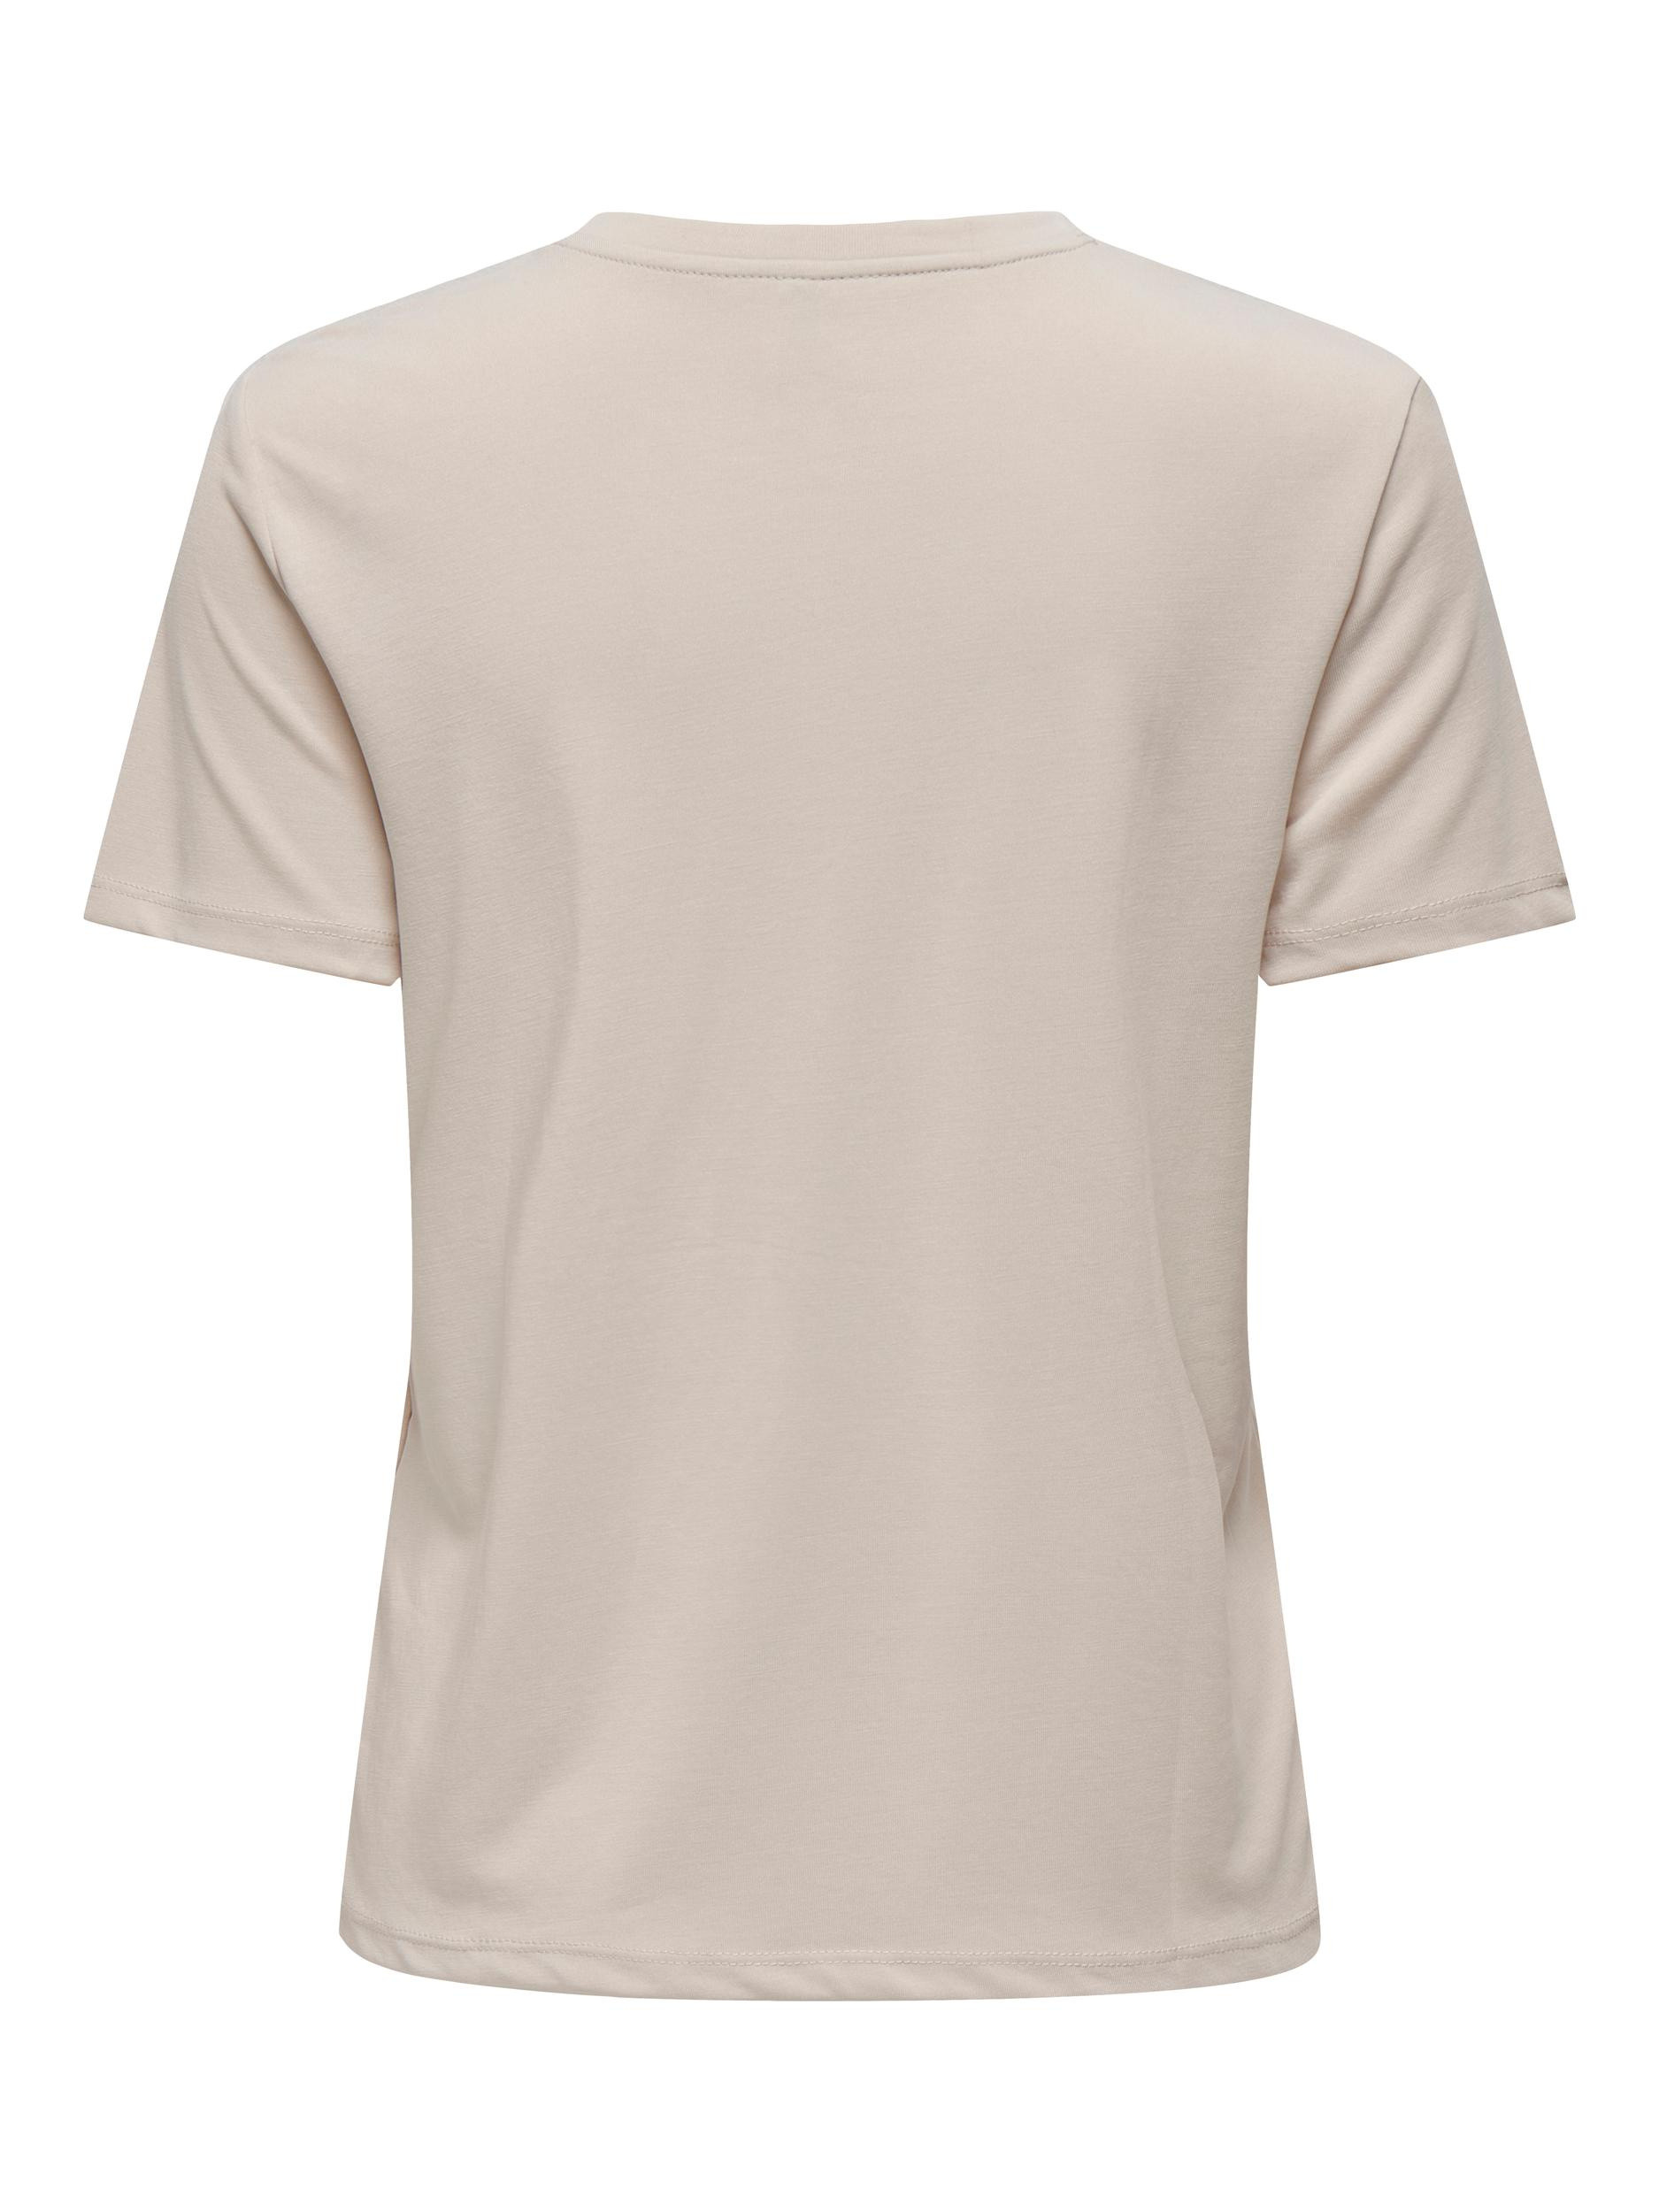 Only - Regular fit T-shirt with print, Beige, large image number 1